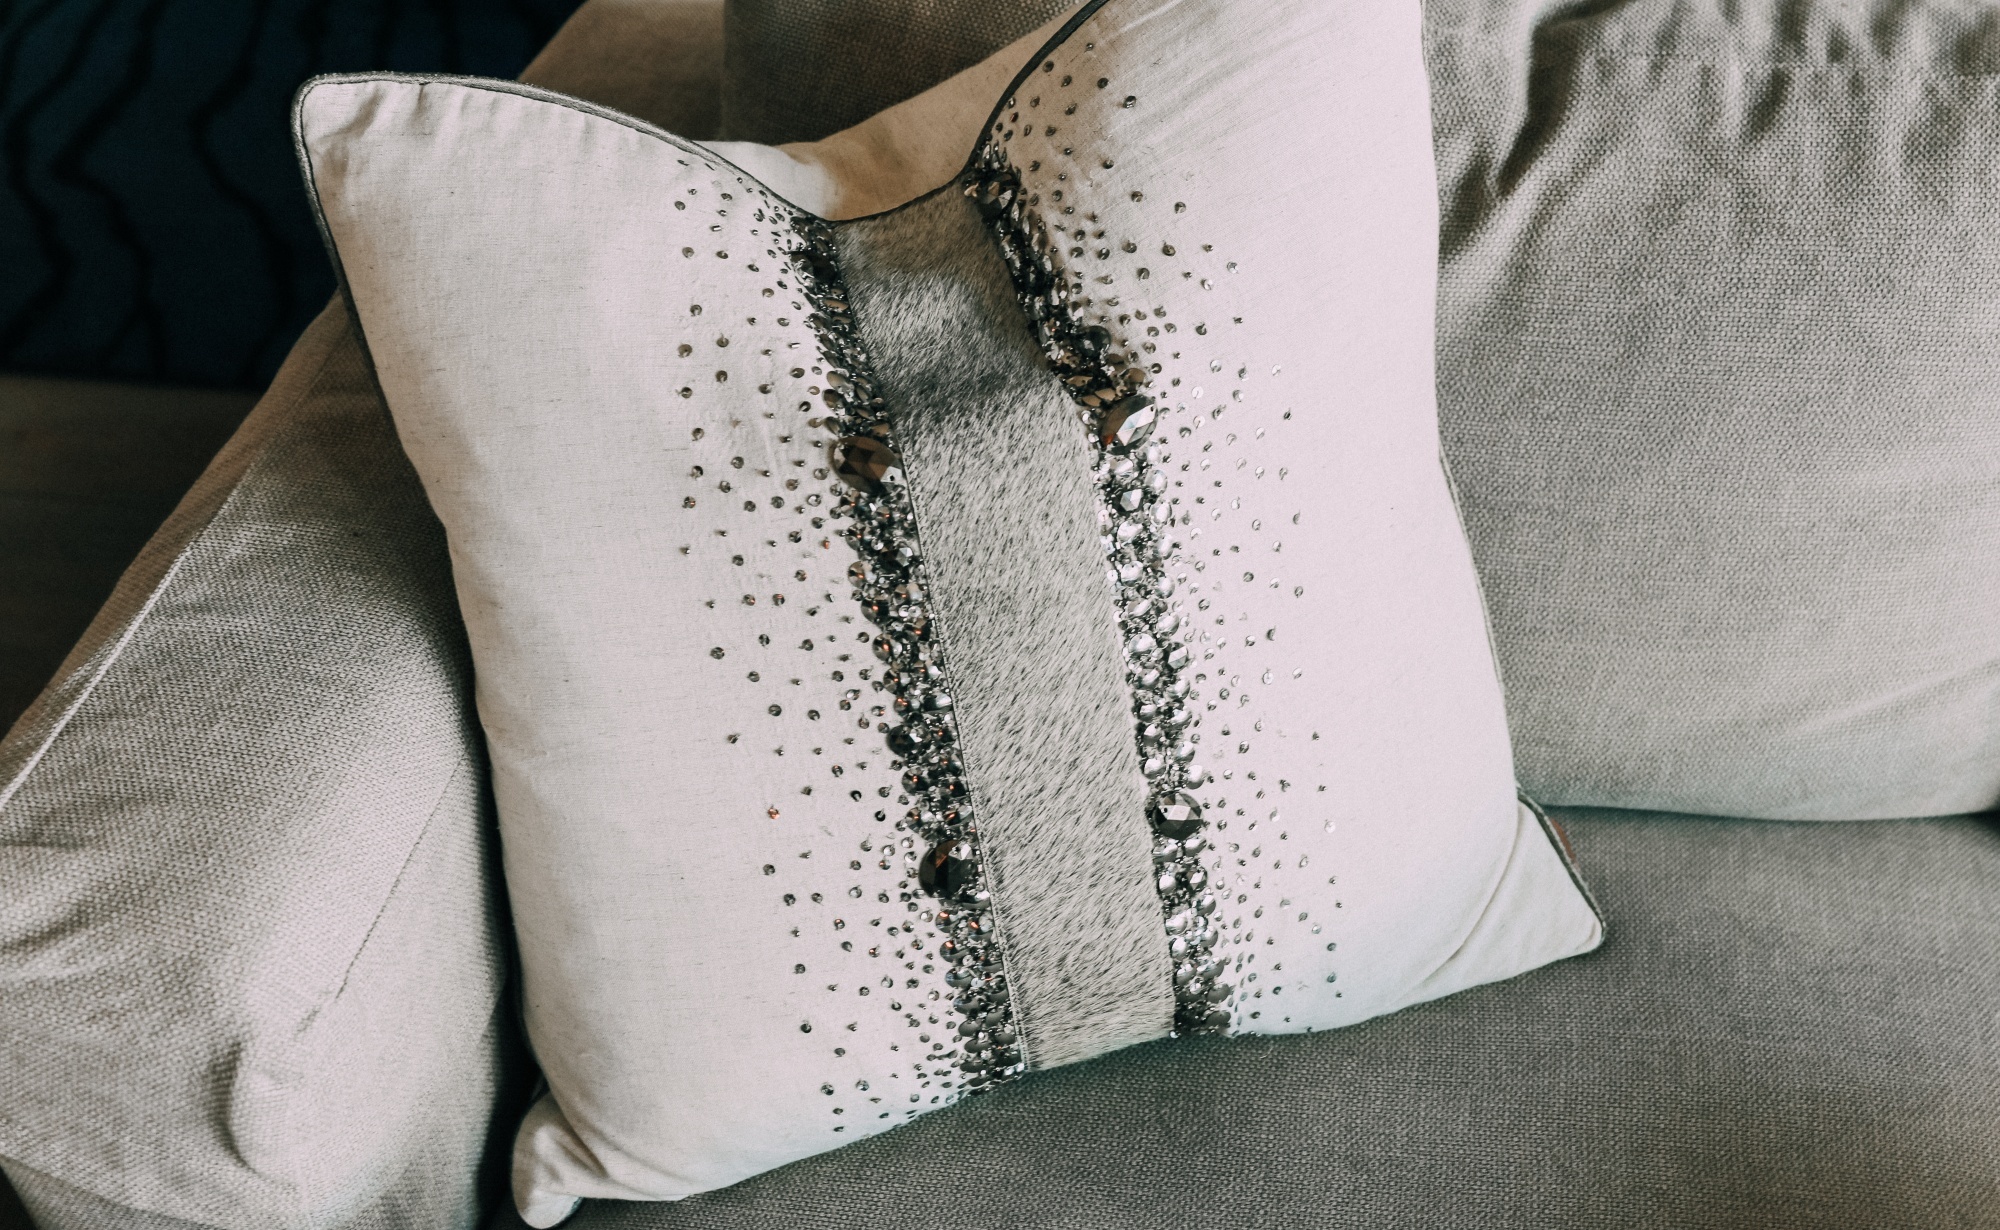 How To Make A Modern Home Cozy, Fashion blogger Erin Busbee of Busbee Style sharing her modern mountain home and how to make it cozy with pillows, personal touches, comfortable seating, house plants, and more! Including a sequin pillow from Clound9 Design in her home in Telluride, Colorado